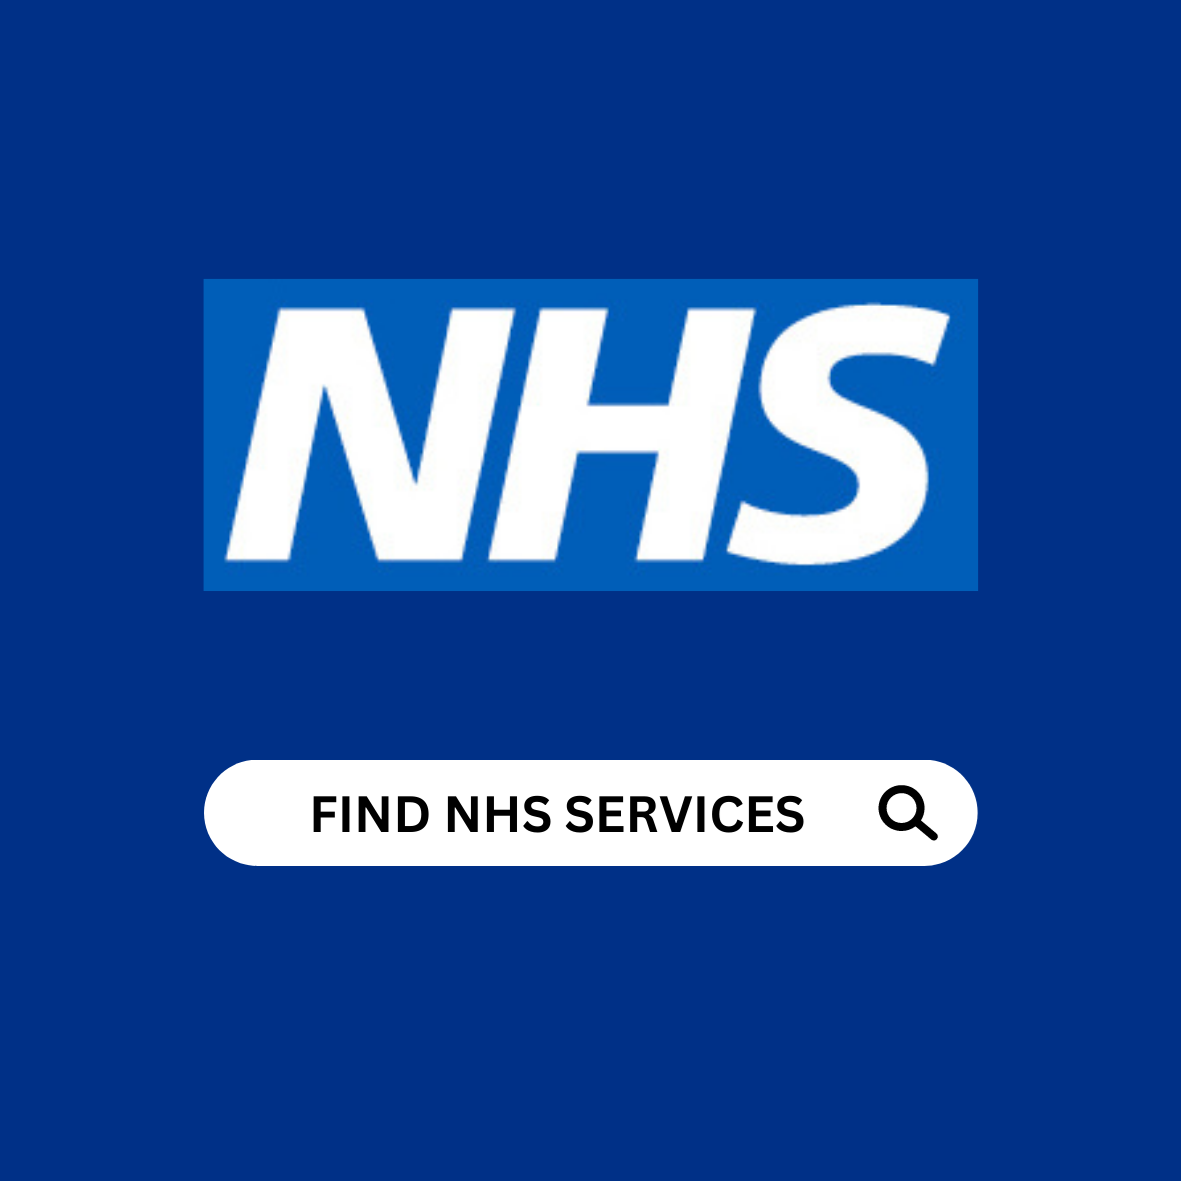 Image of NHS Logo and Search Bar